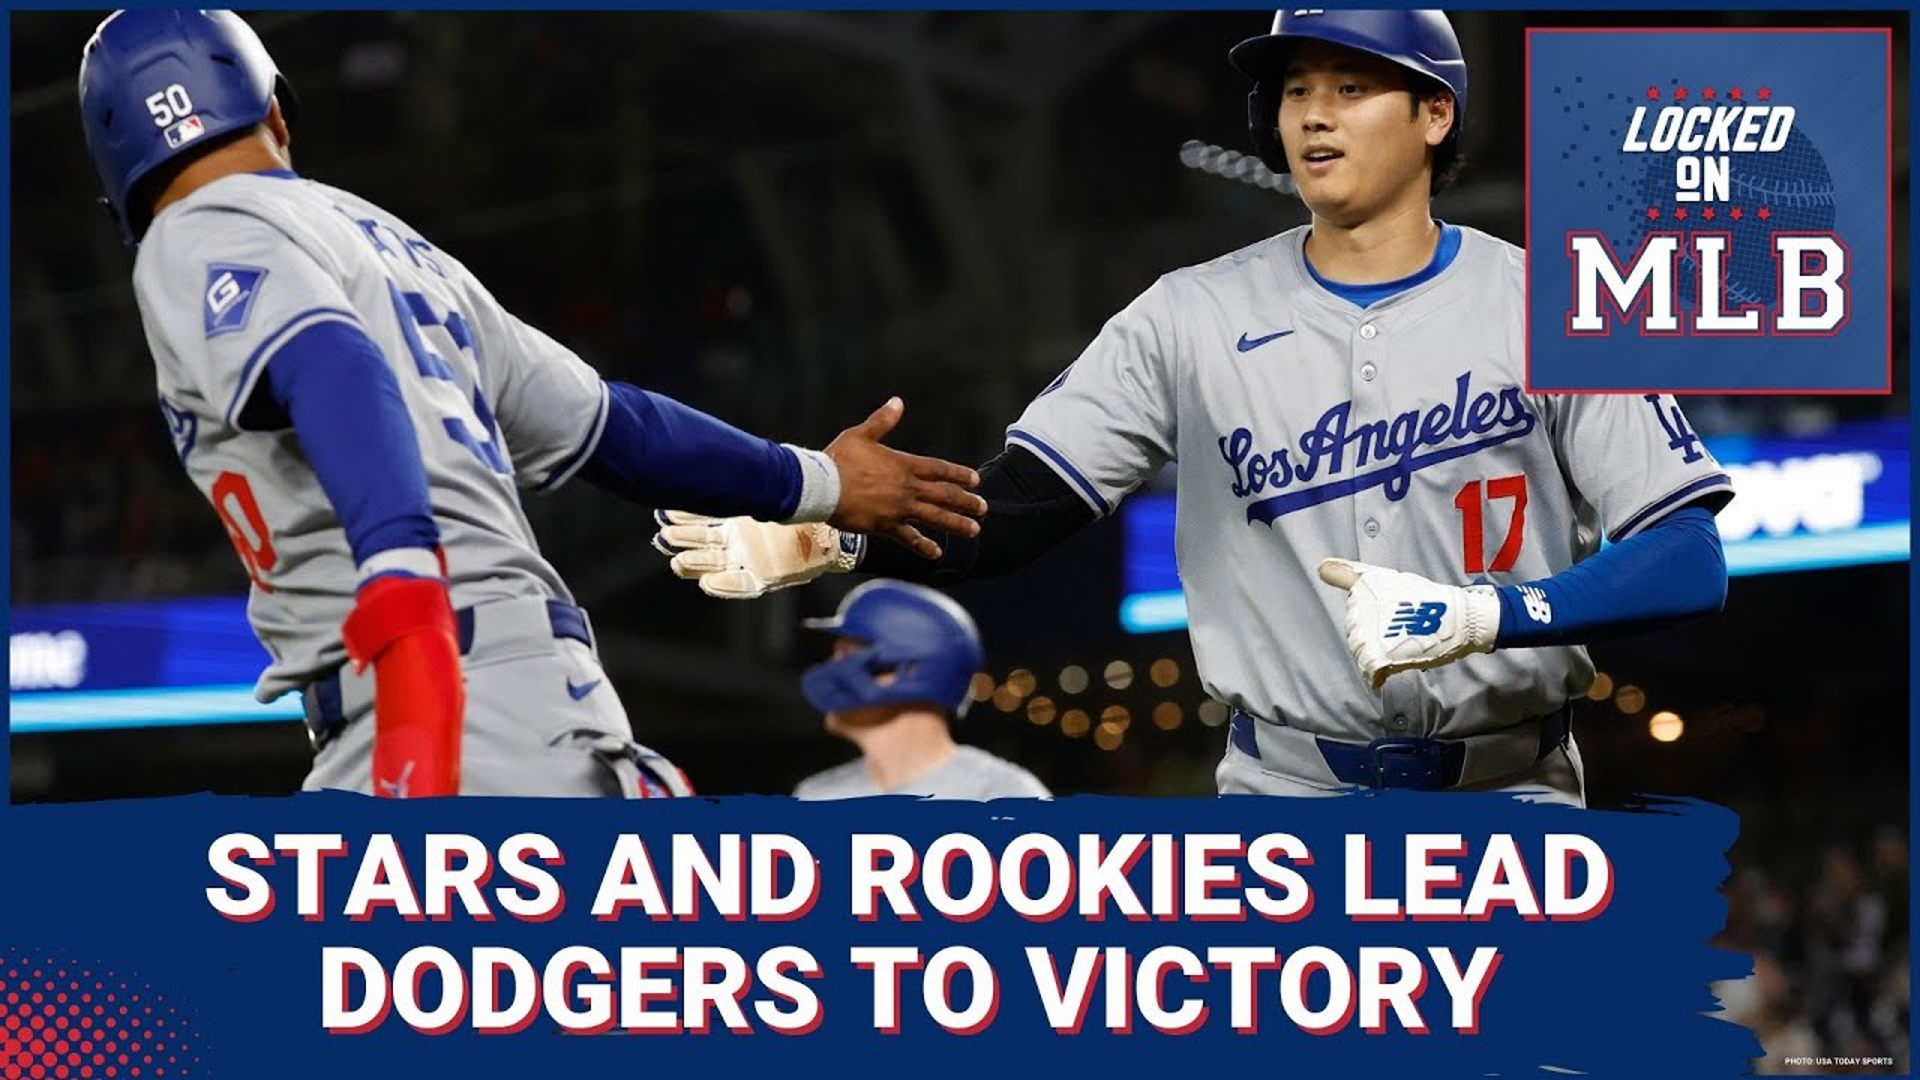 Big names and unknowns led the Dodgers to a convincing win over the Nationals.